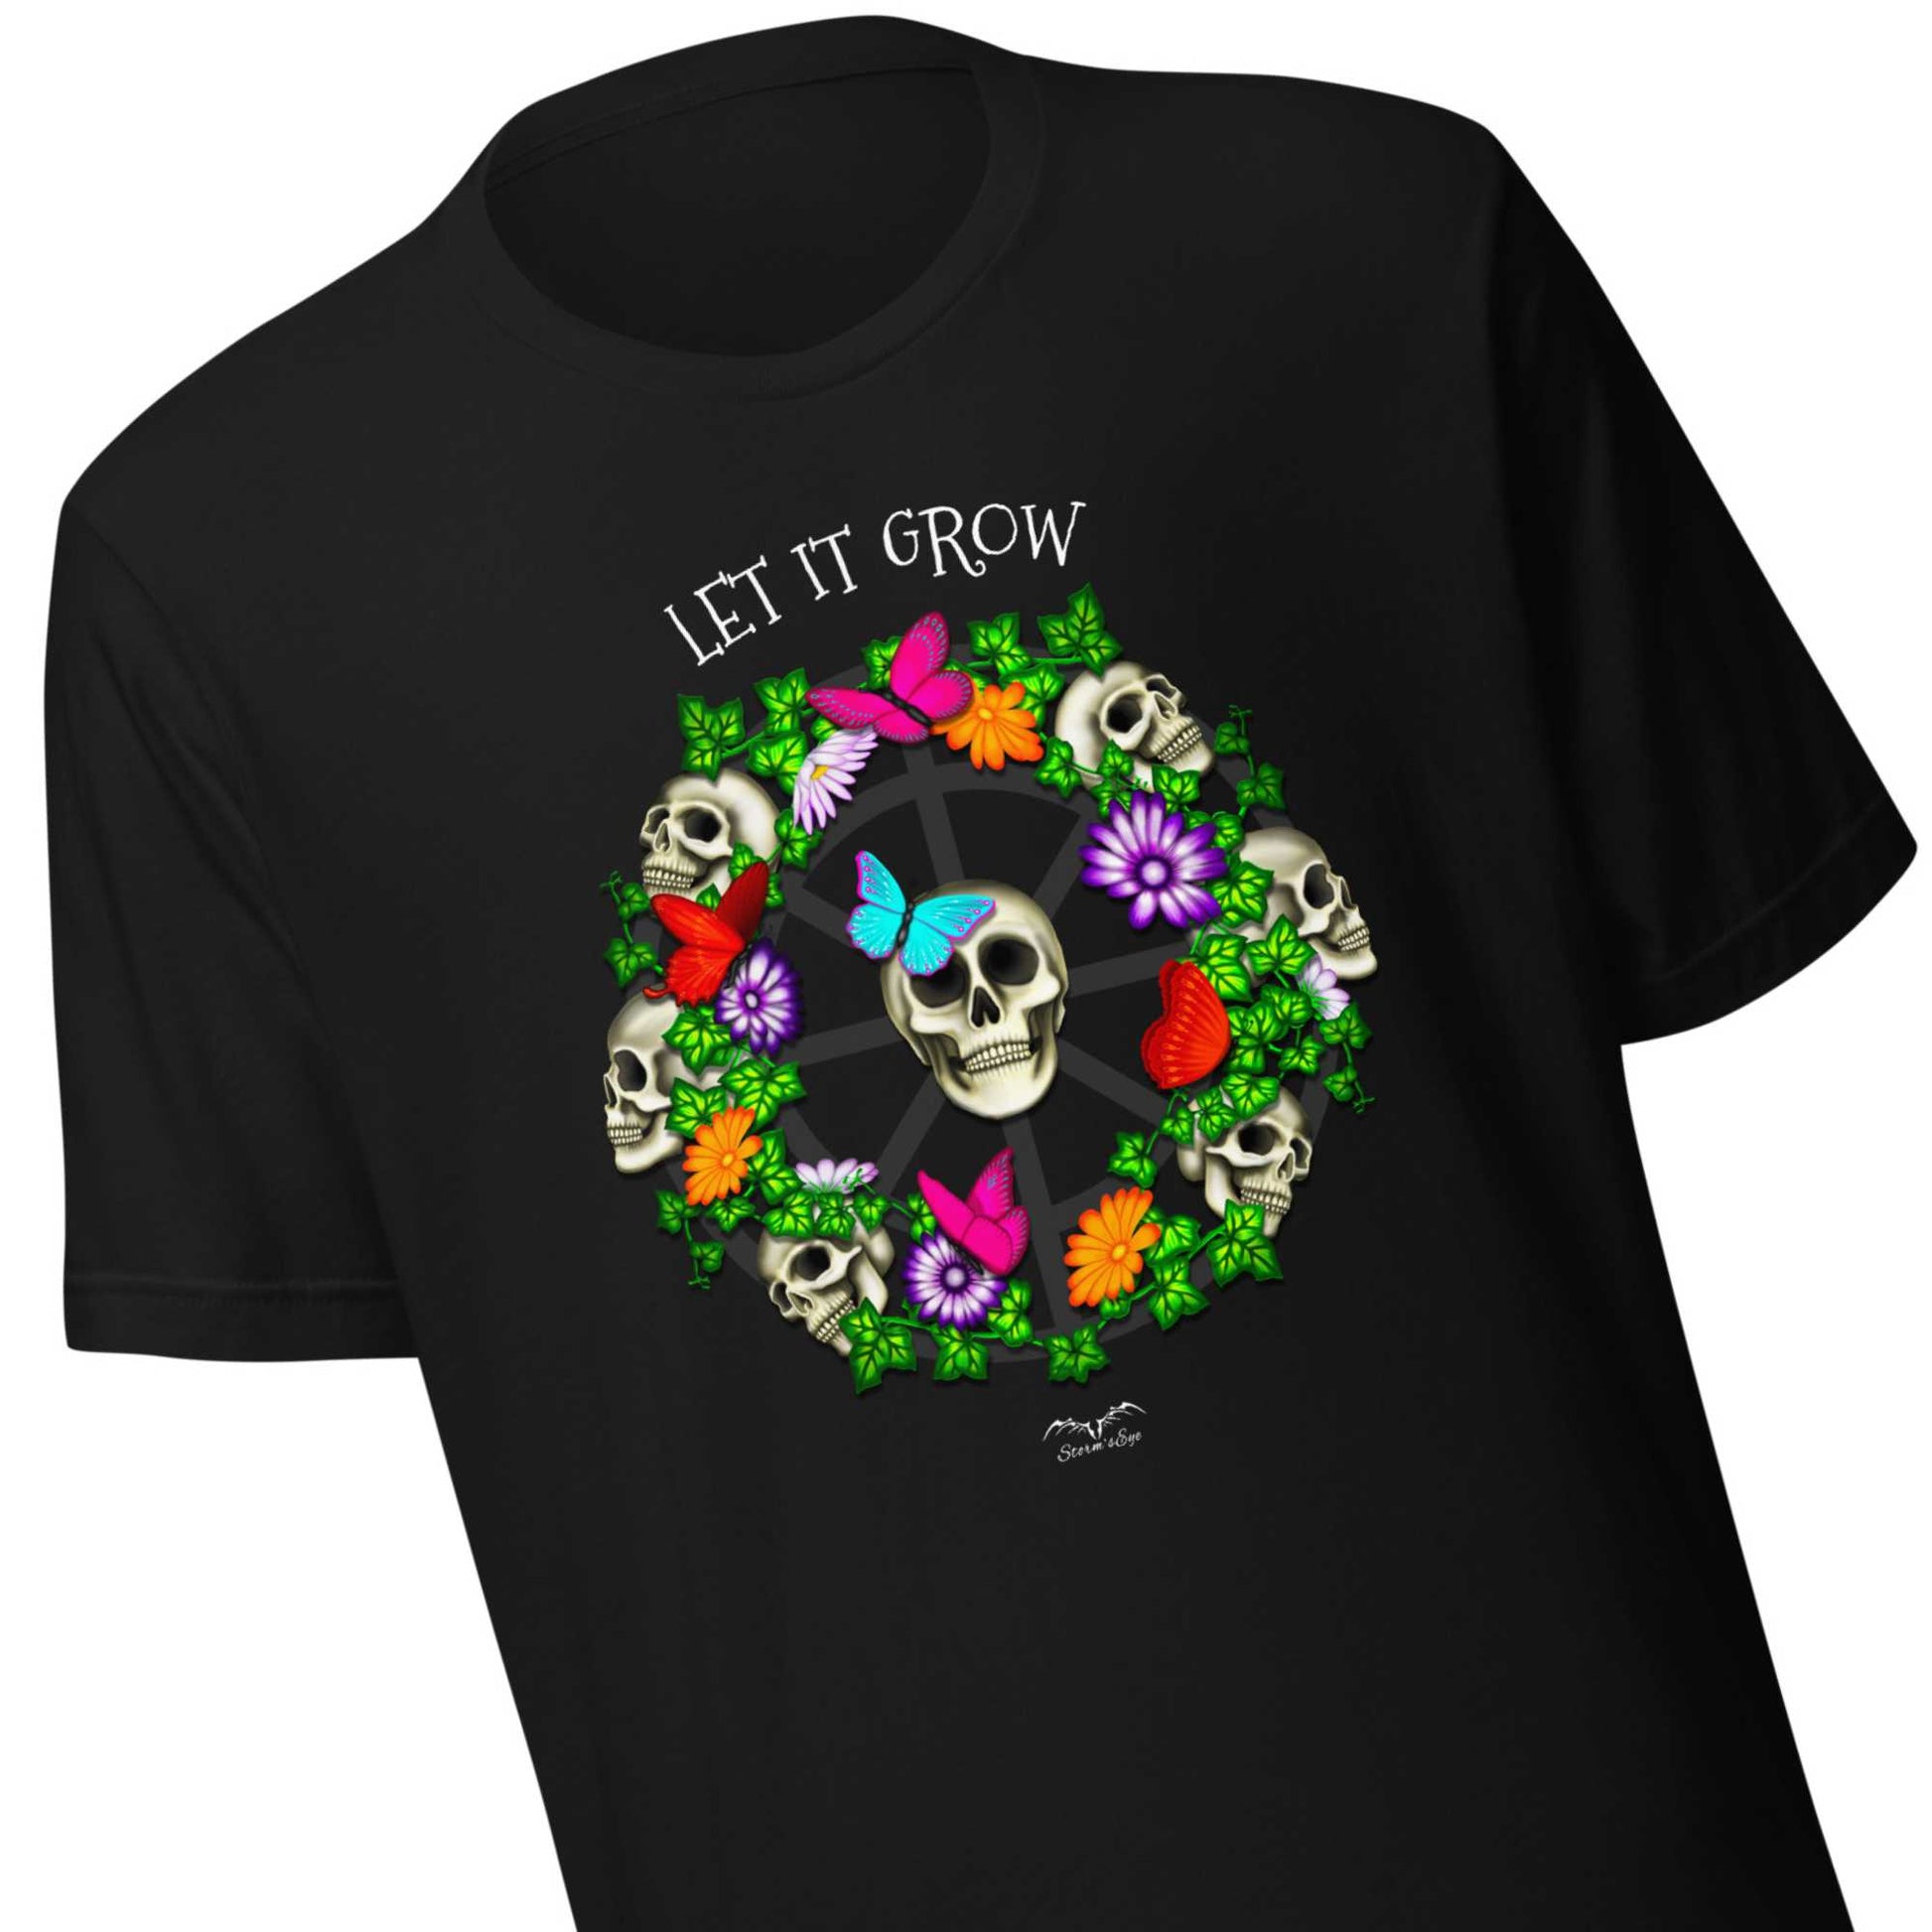 stormseye design skulls and flowers gothic T shirt, detail view black